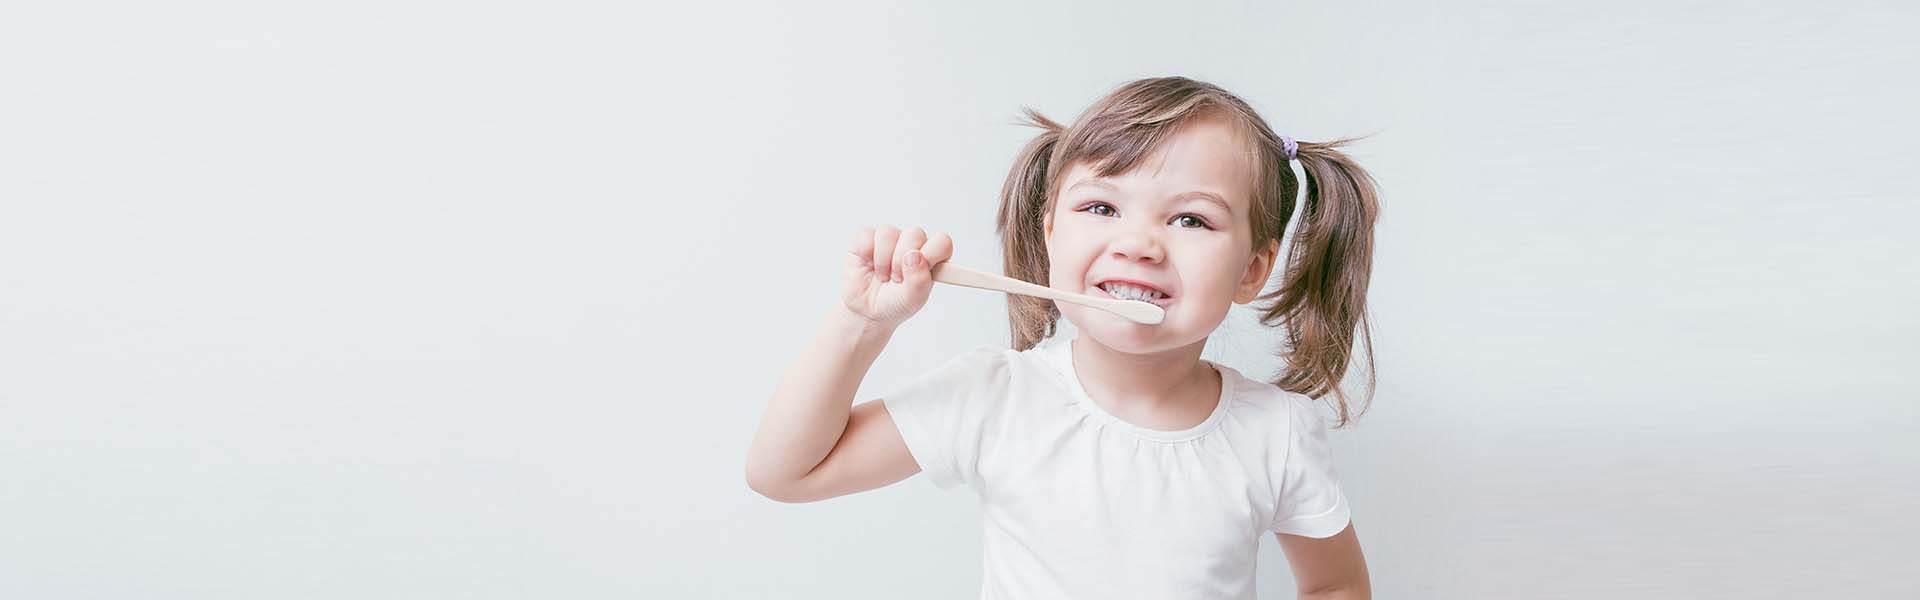 Child girl brushes her teeth with a bamboo toothbrush. concept: environmental care, zero waste, ecology